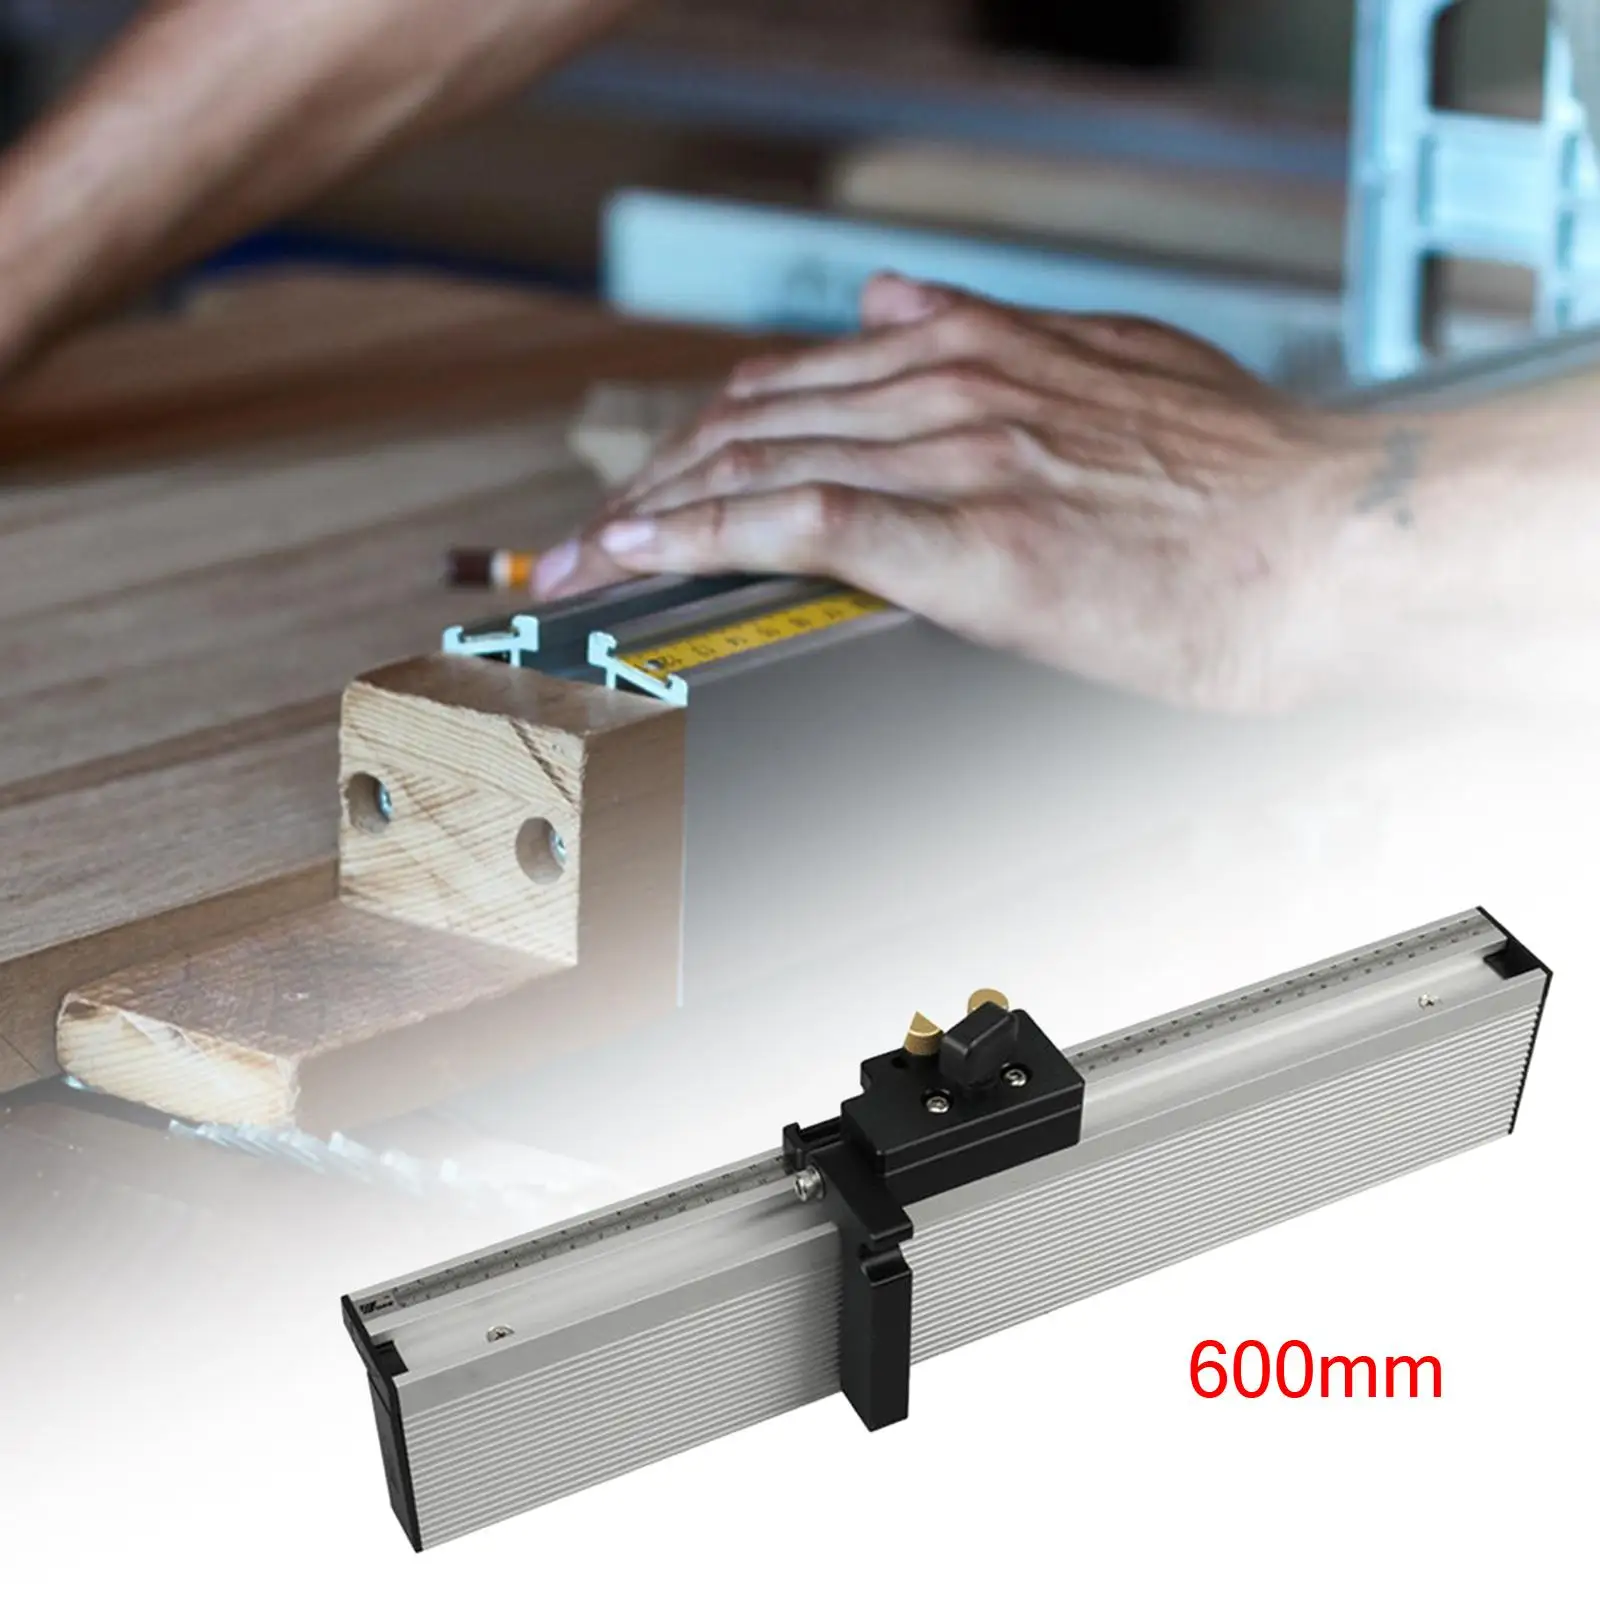 Aluminium Profile Fence Sliding Brackets Table Saw Trimmer Engraving Machine Table Saw Scale Woodworking Tool & Miter Gauge